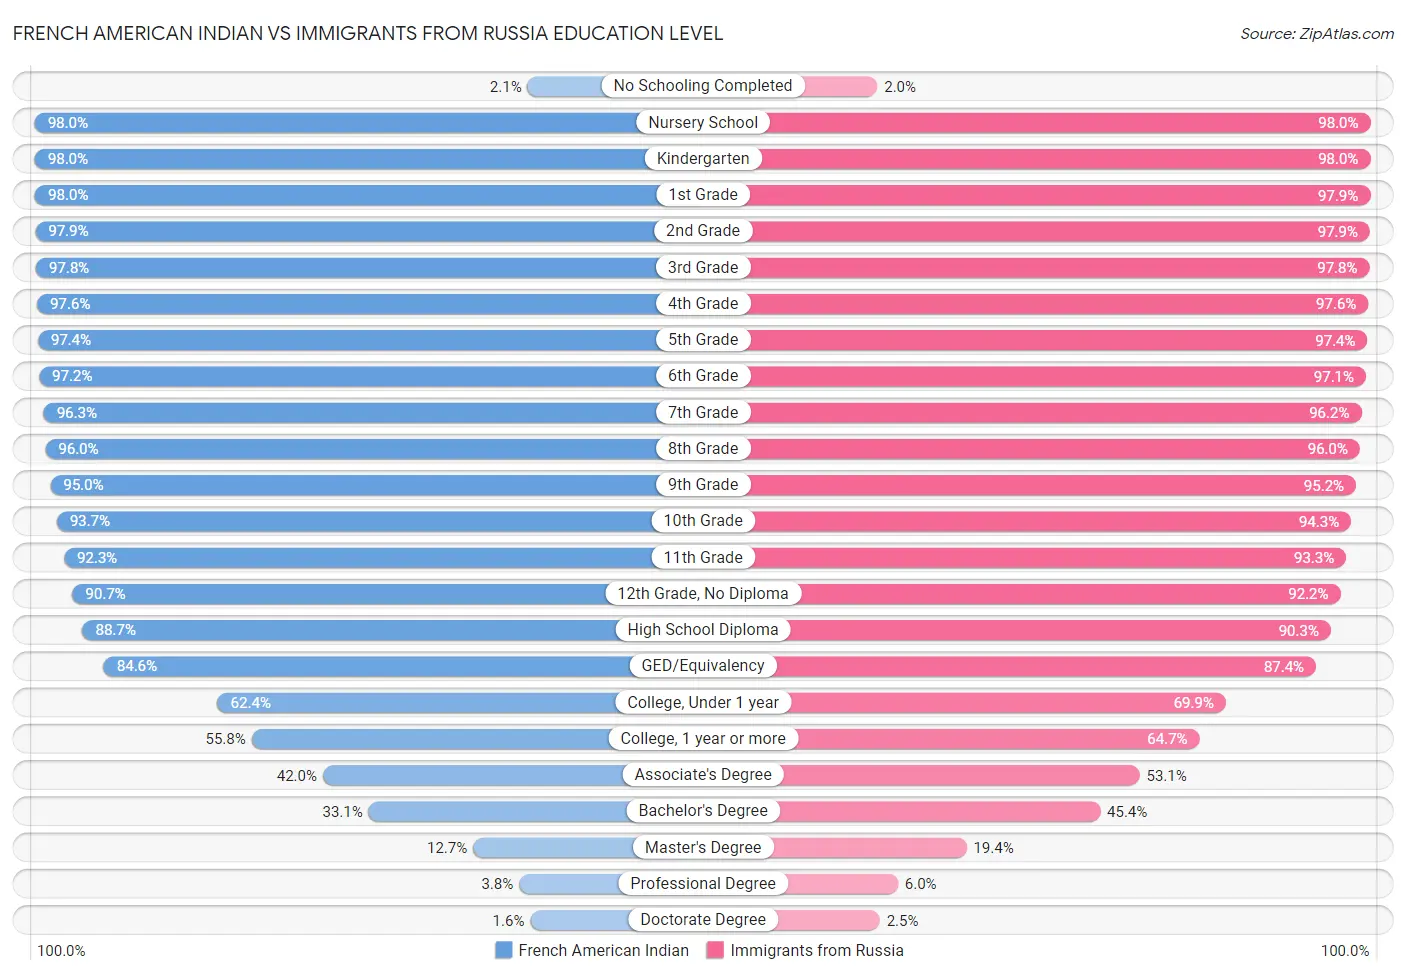 French American Indian vs Immigrants from Russia Education Level